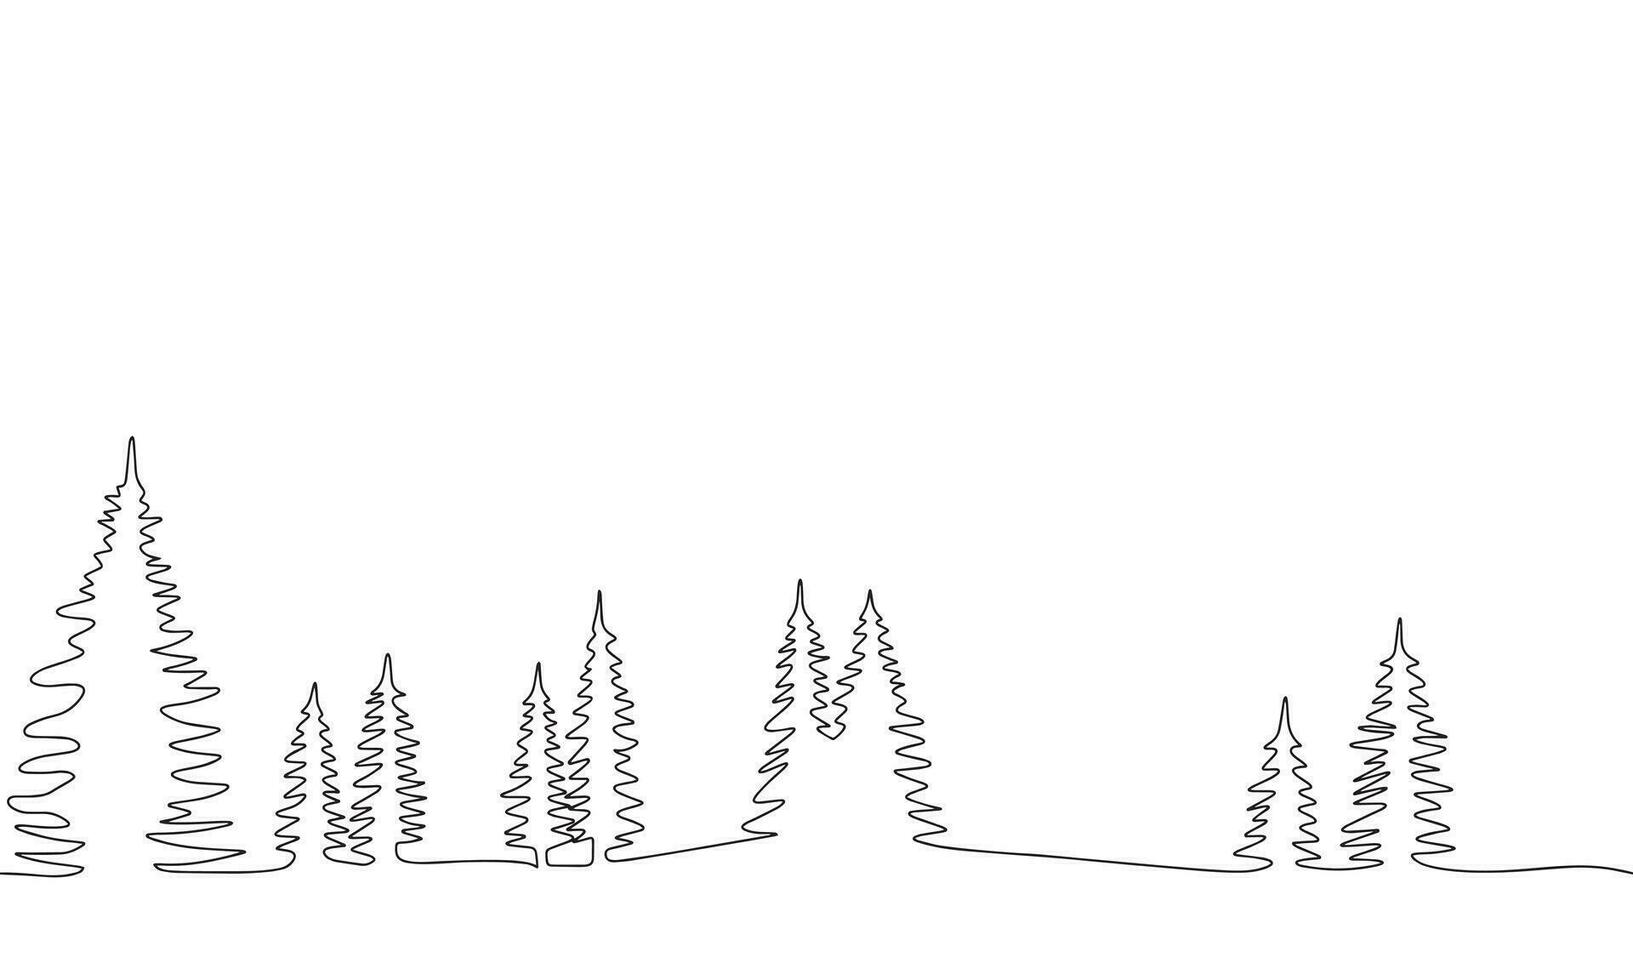 Landscape with pine trees one line continuous. Line art fir trees silhouette. Outline concept banner for winter. Vector illustraiton.